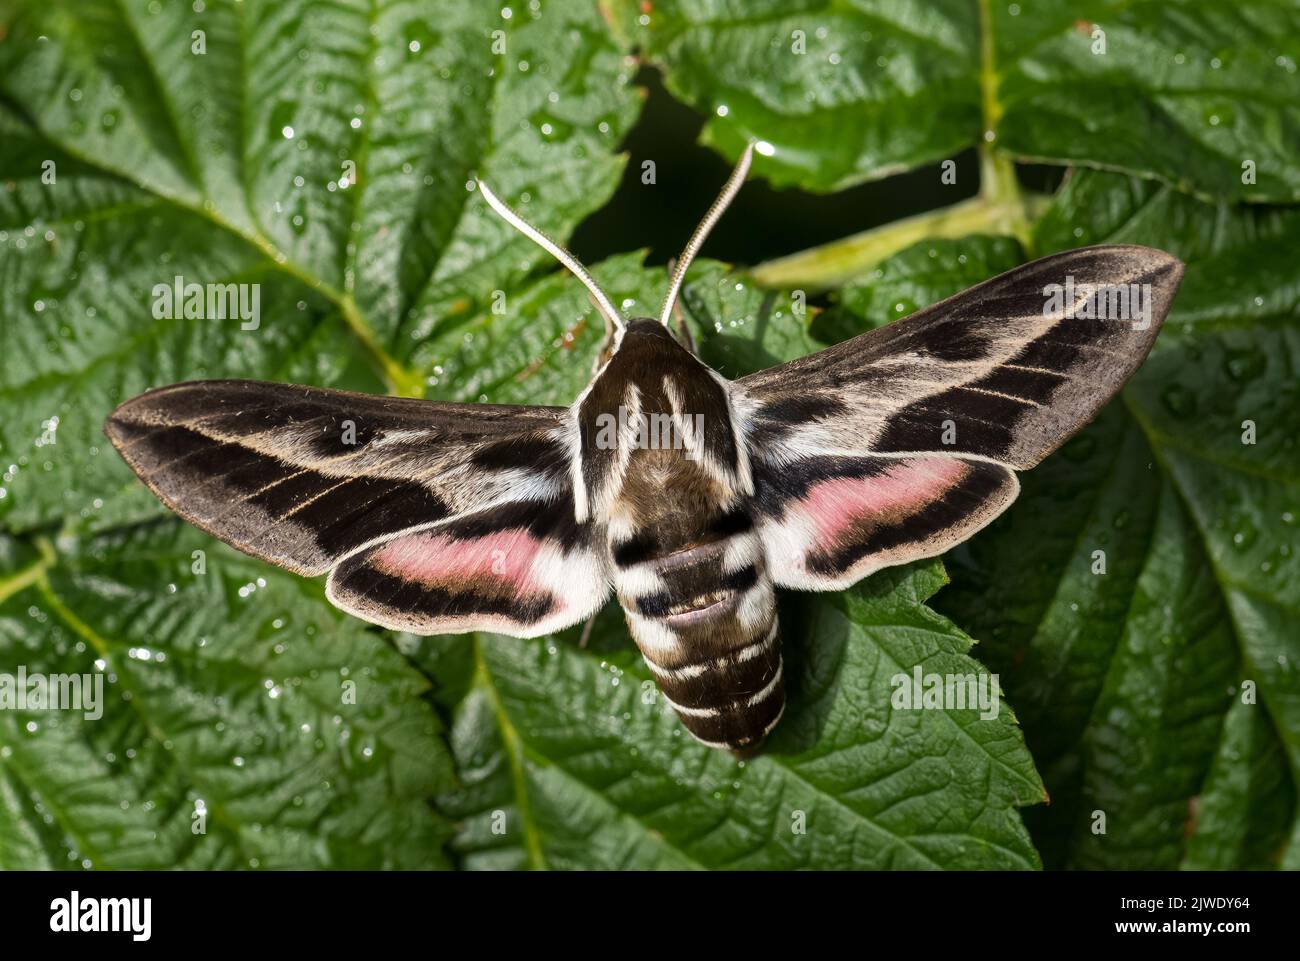 Barbary spurge hawk-moth - Hyles tithymali, beautiful colored hawk-moth from North Africa and Canary Islands. Stock Photo